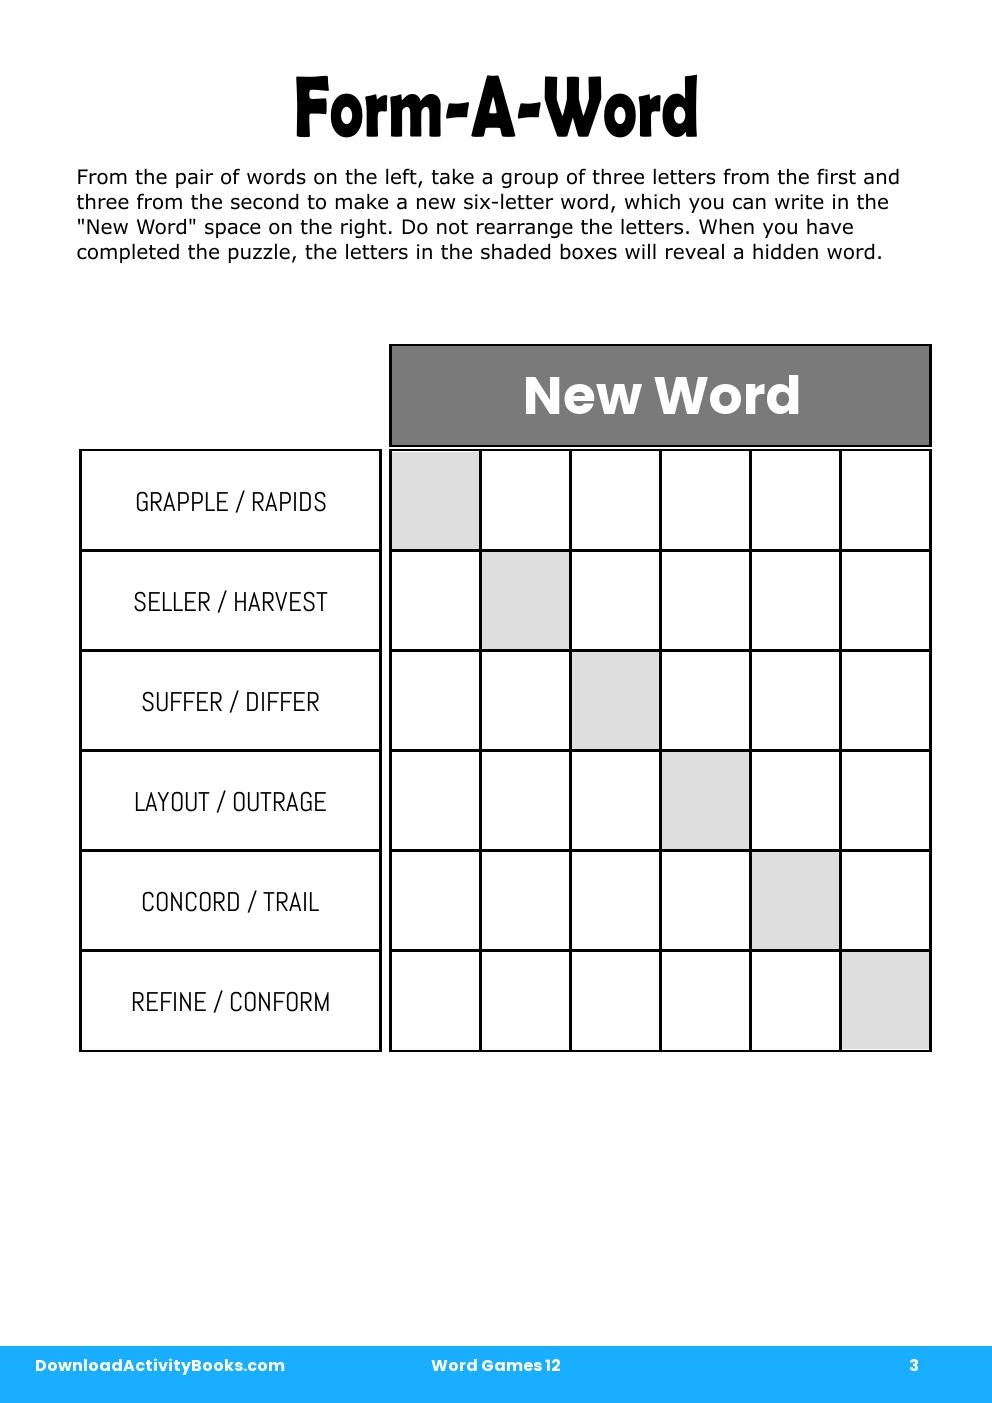 Form-A-Word in Word Games 12